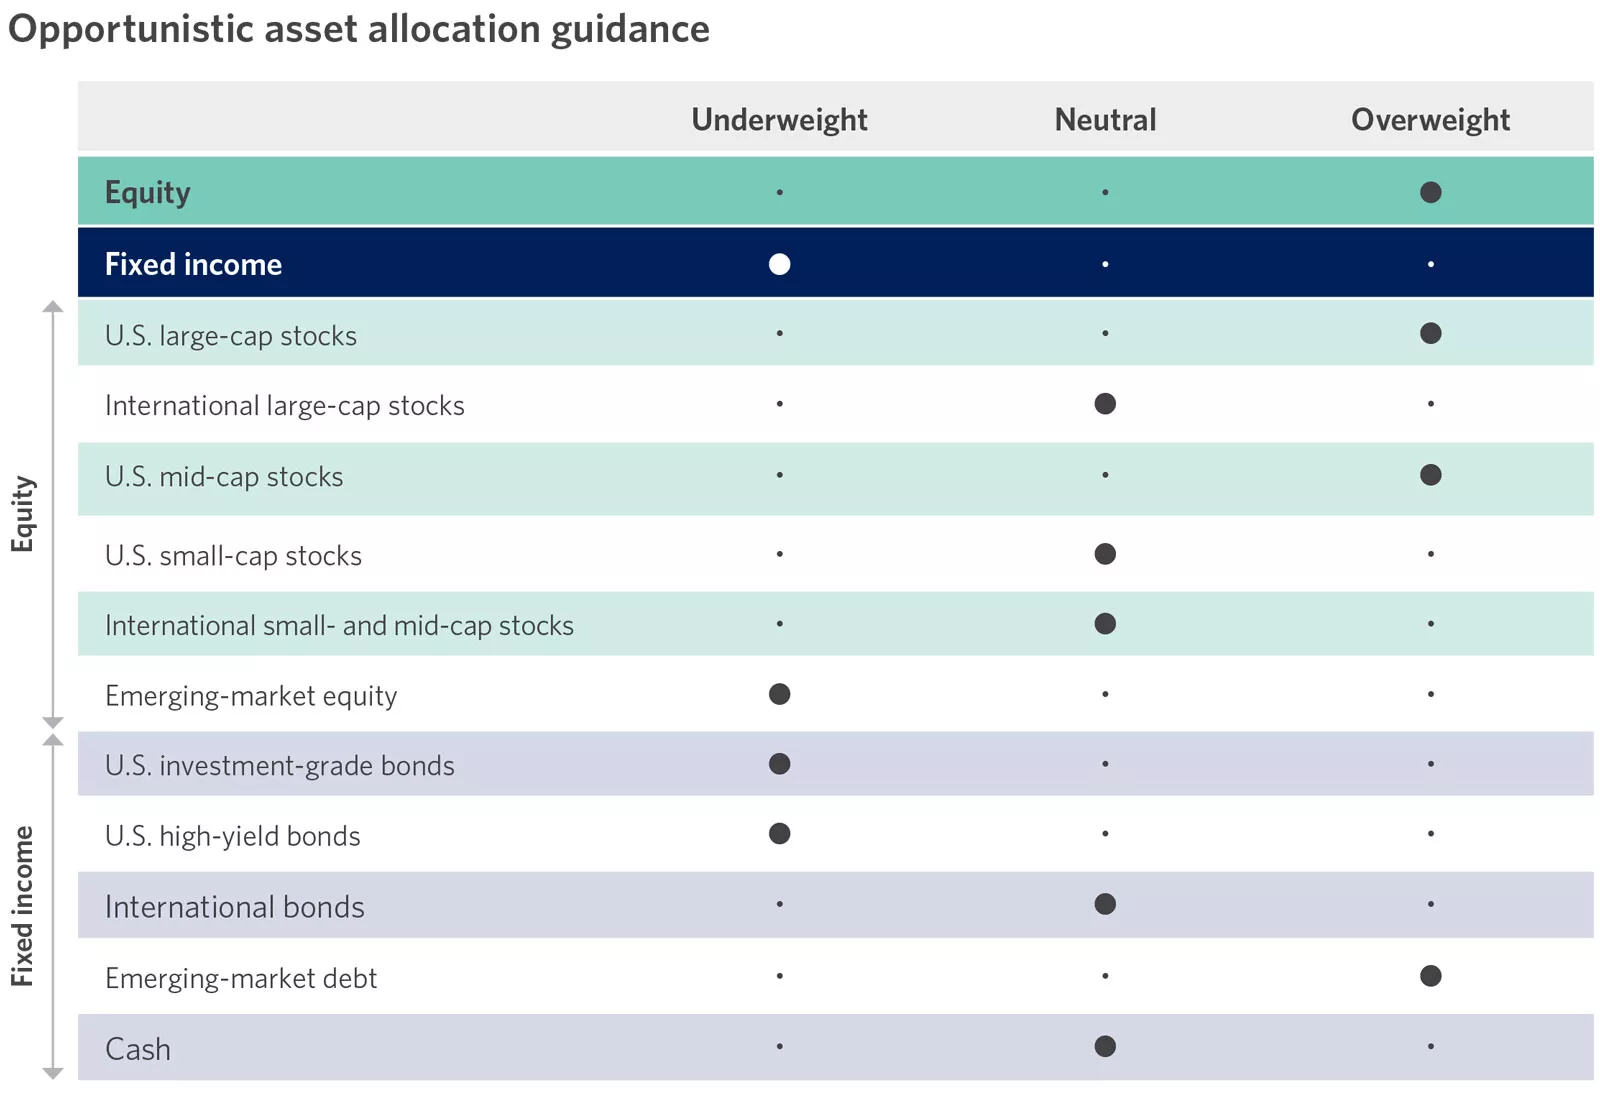  Chart showing opportunistic asset allocation guidance
